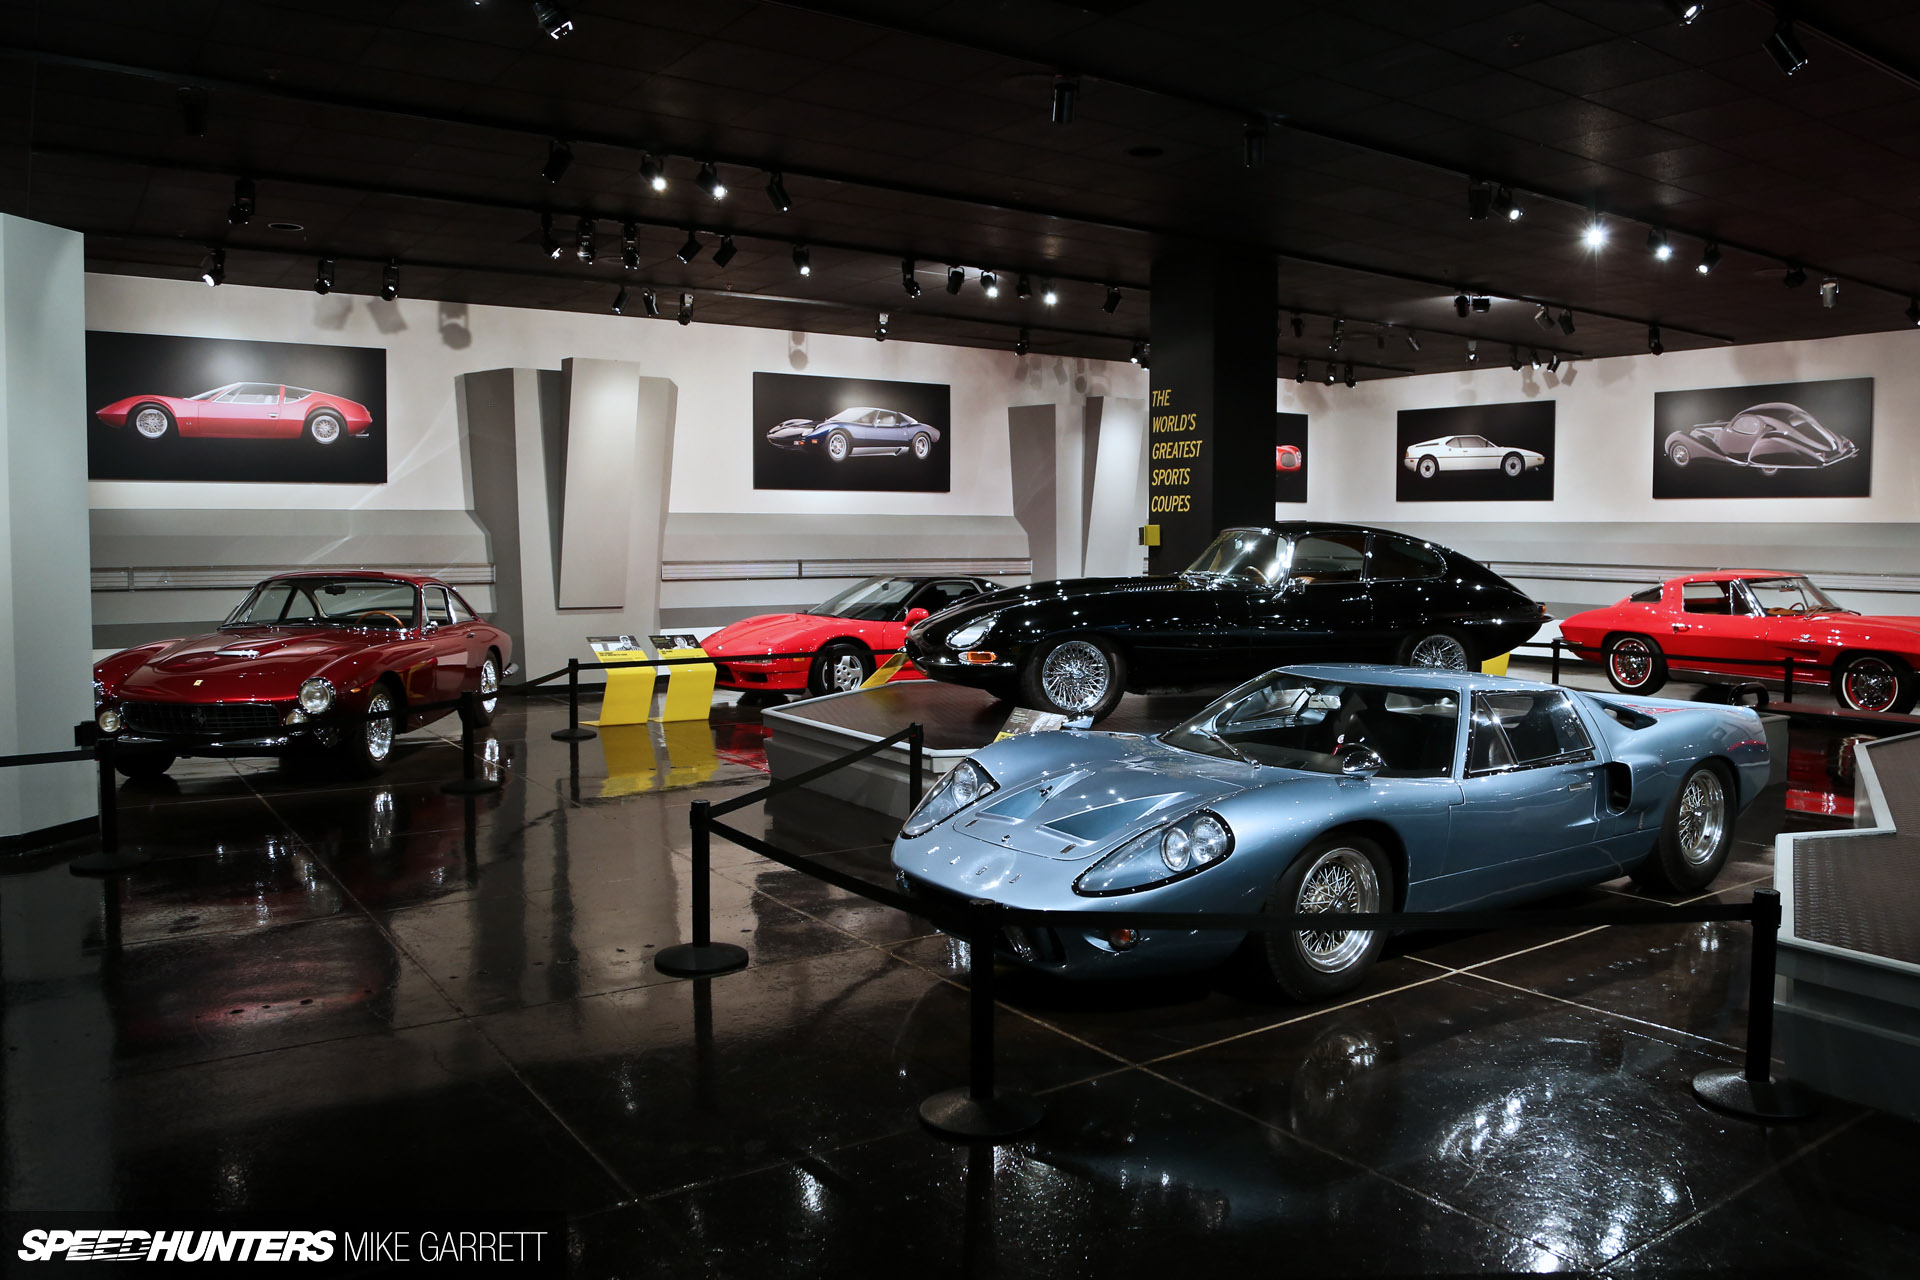 Selecting The World's Greatest Sports Coupe - Speedhunters